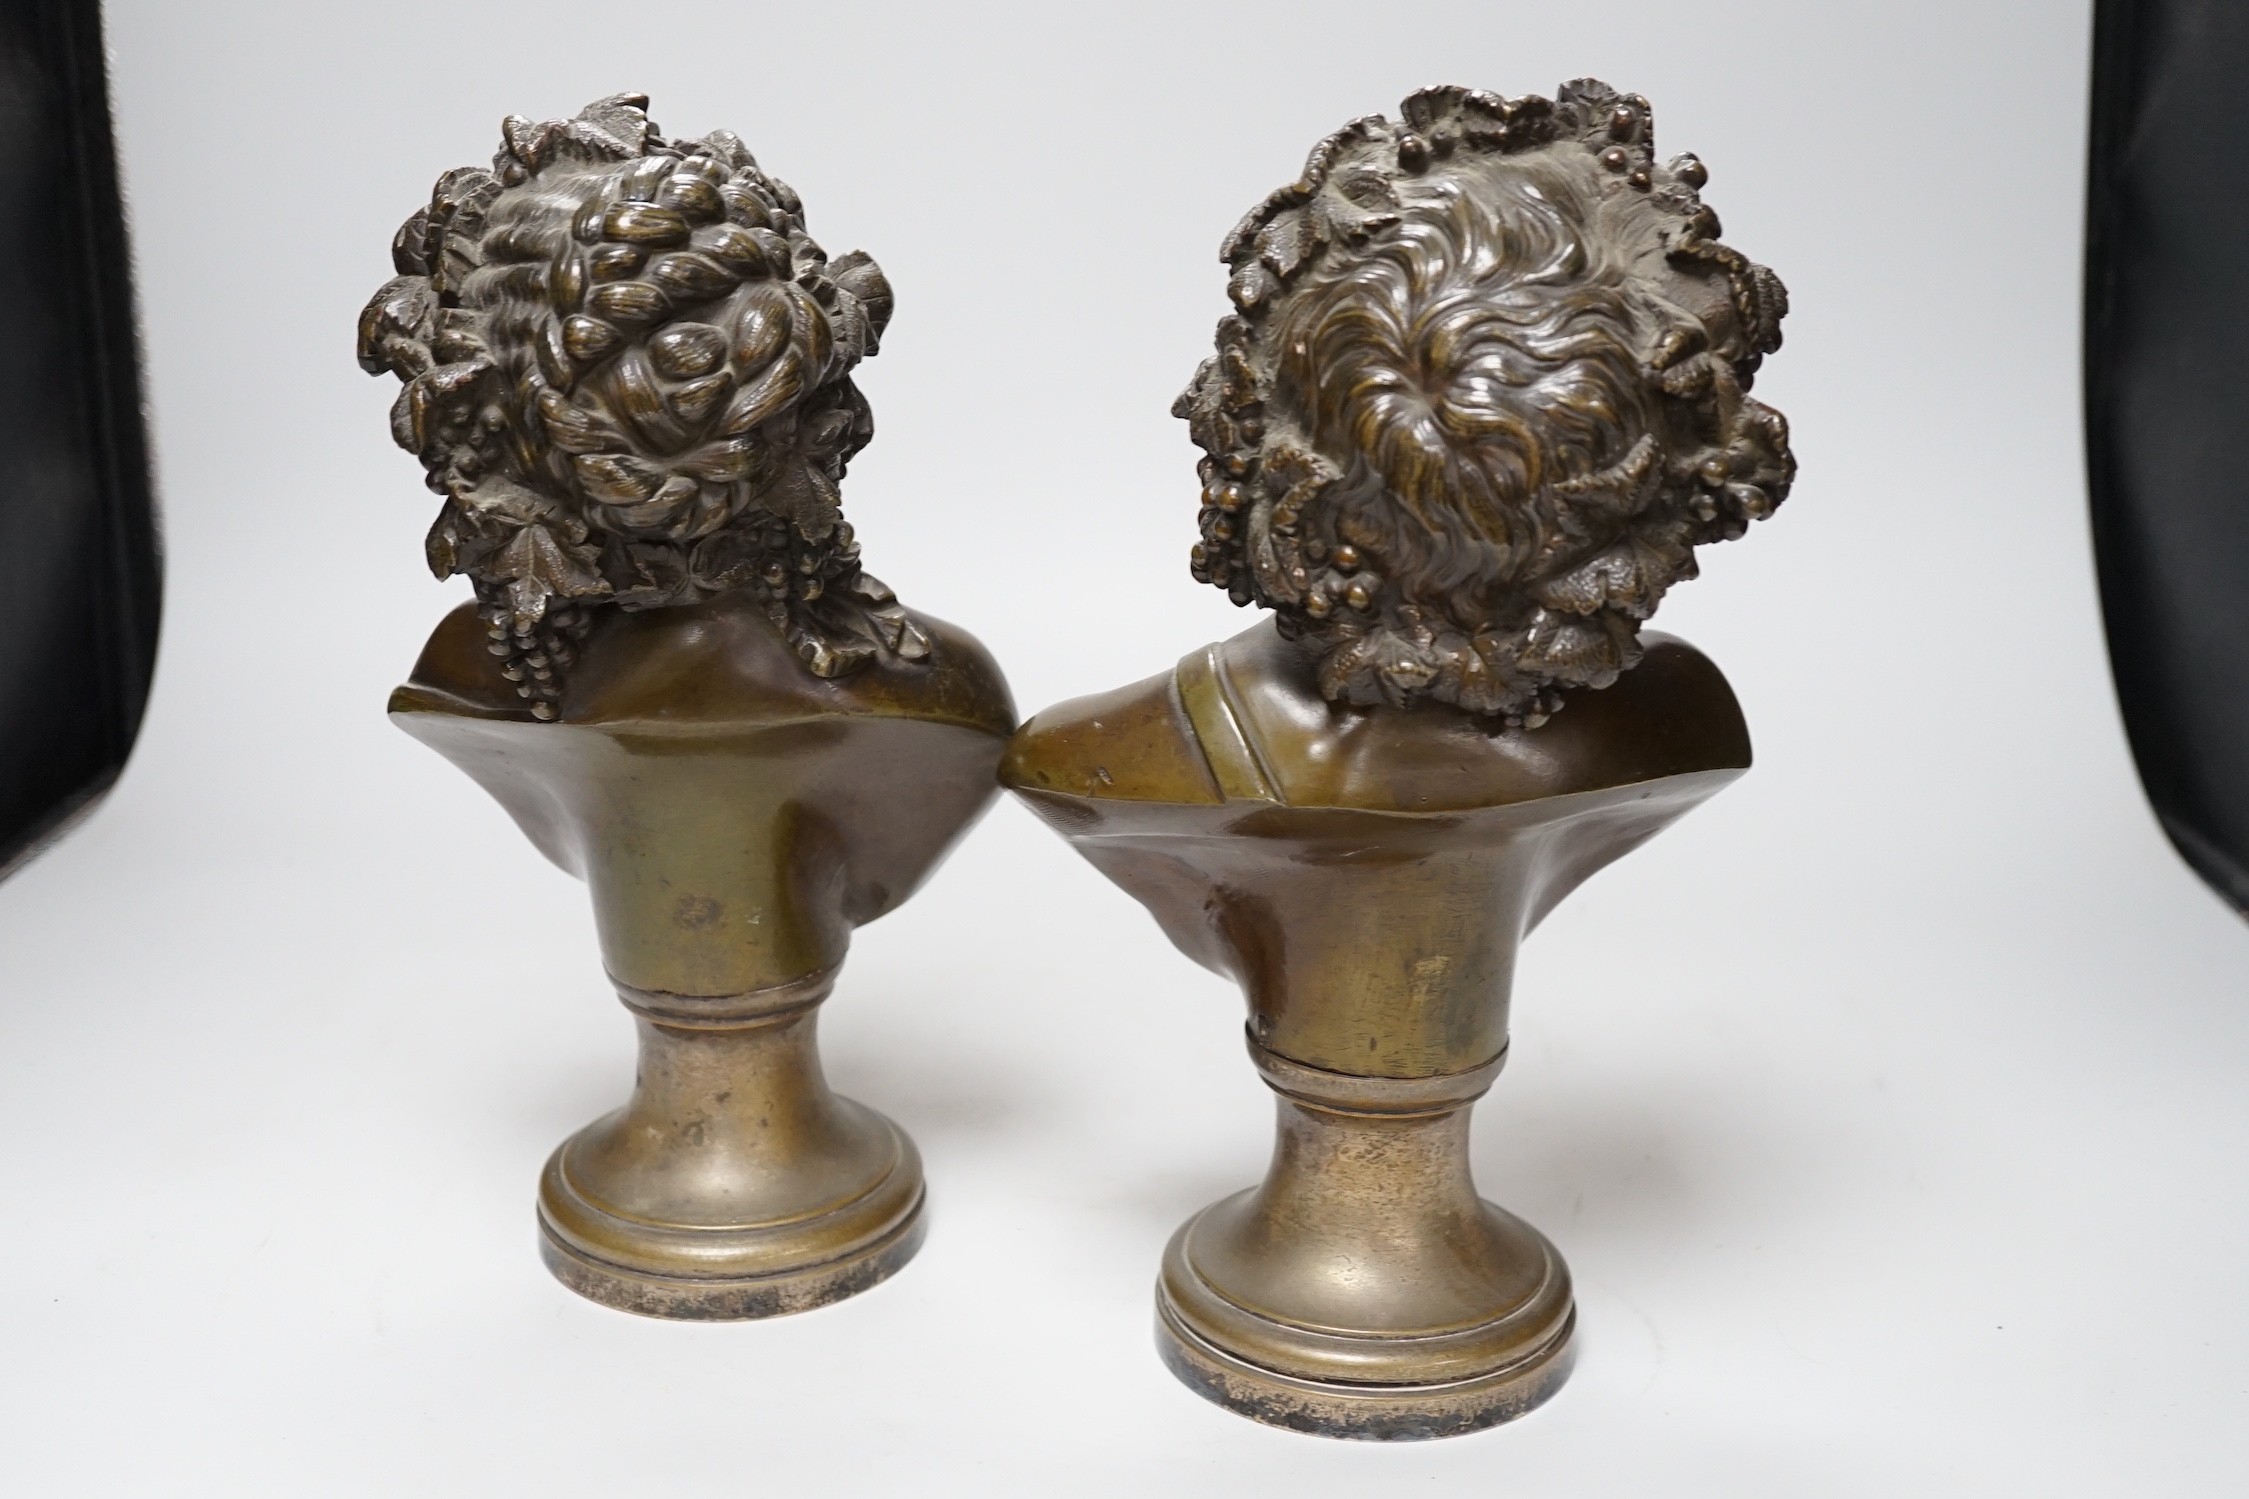 A pair of late 19th century French bronze Bacchic busts, on plated socles, 28cm - Image 3 of 3